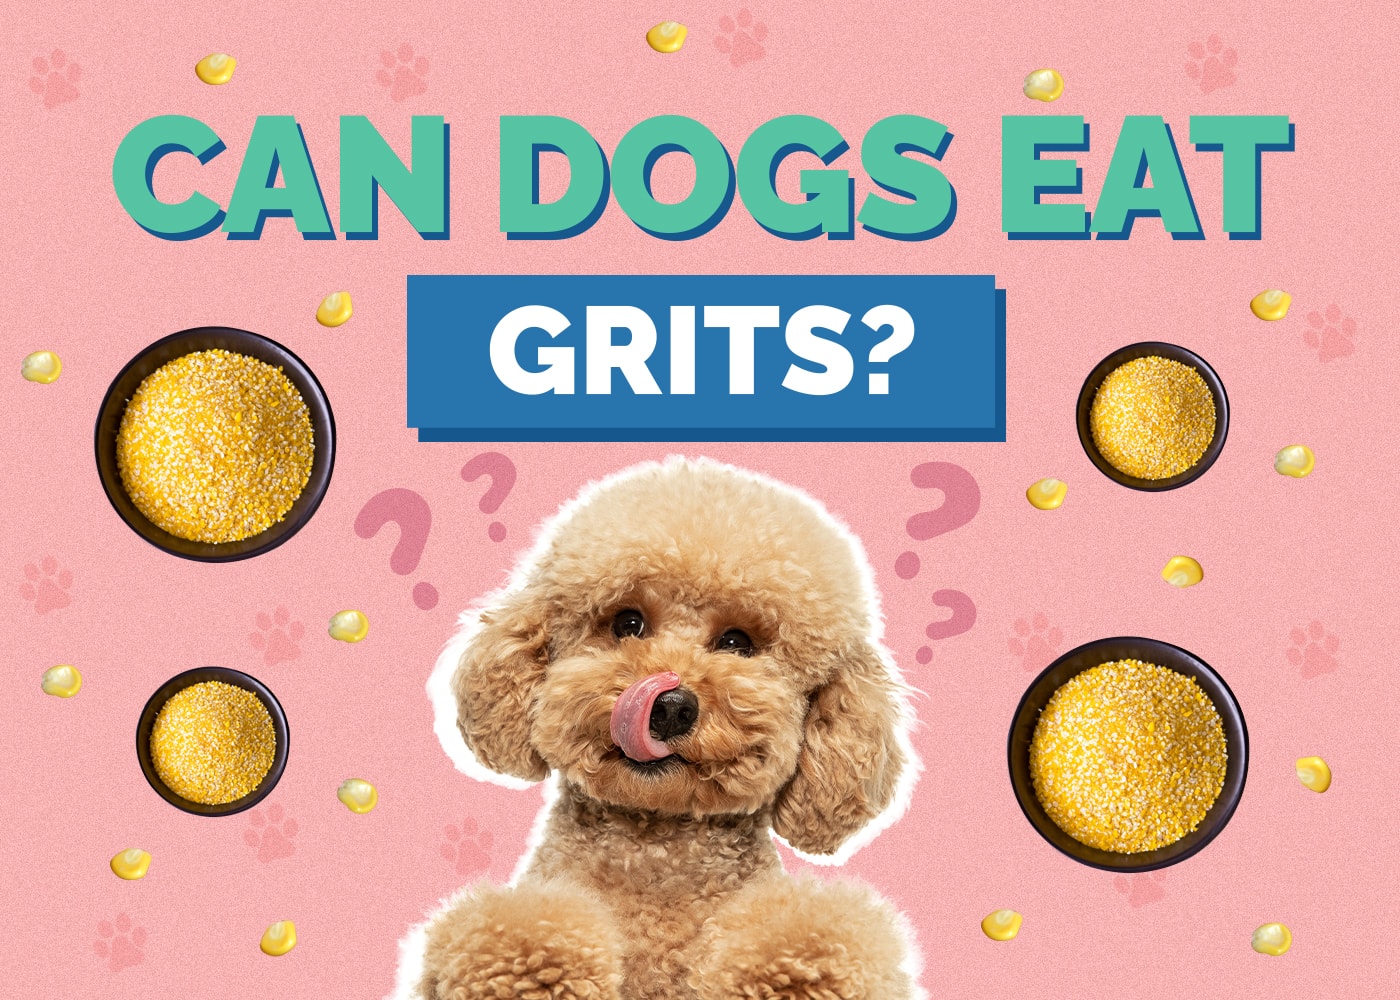 Can Dogs Eat grits